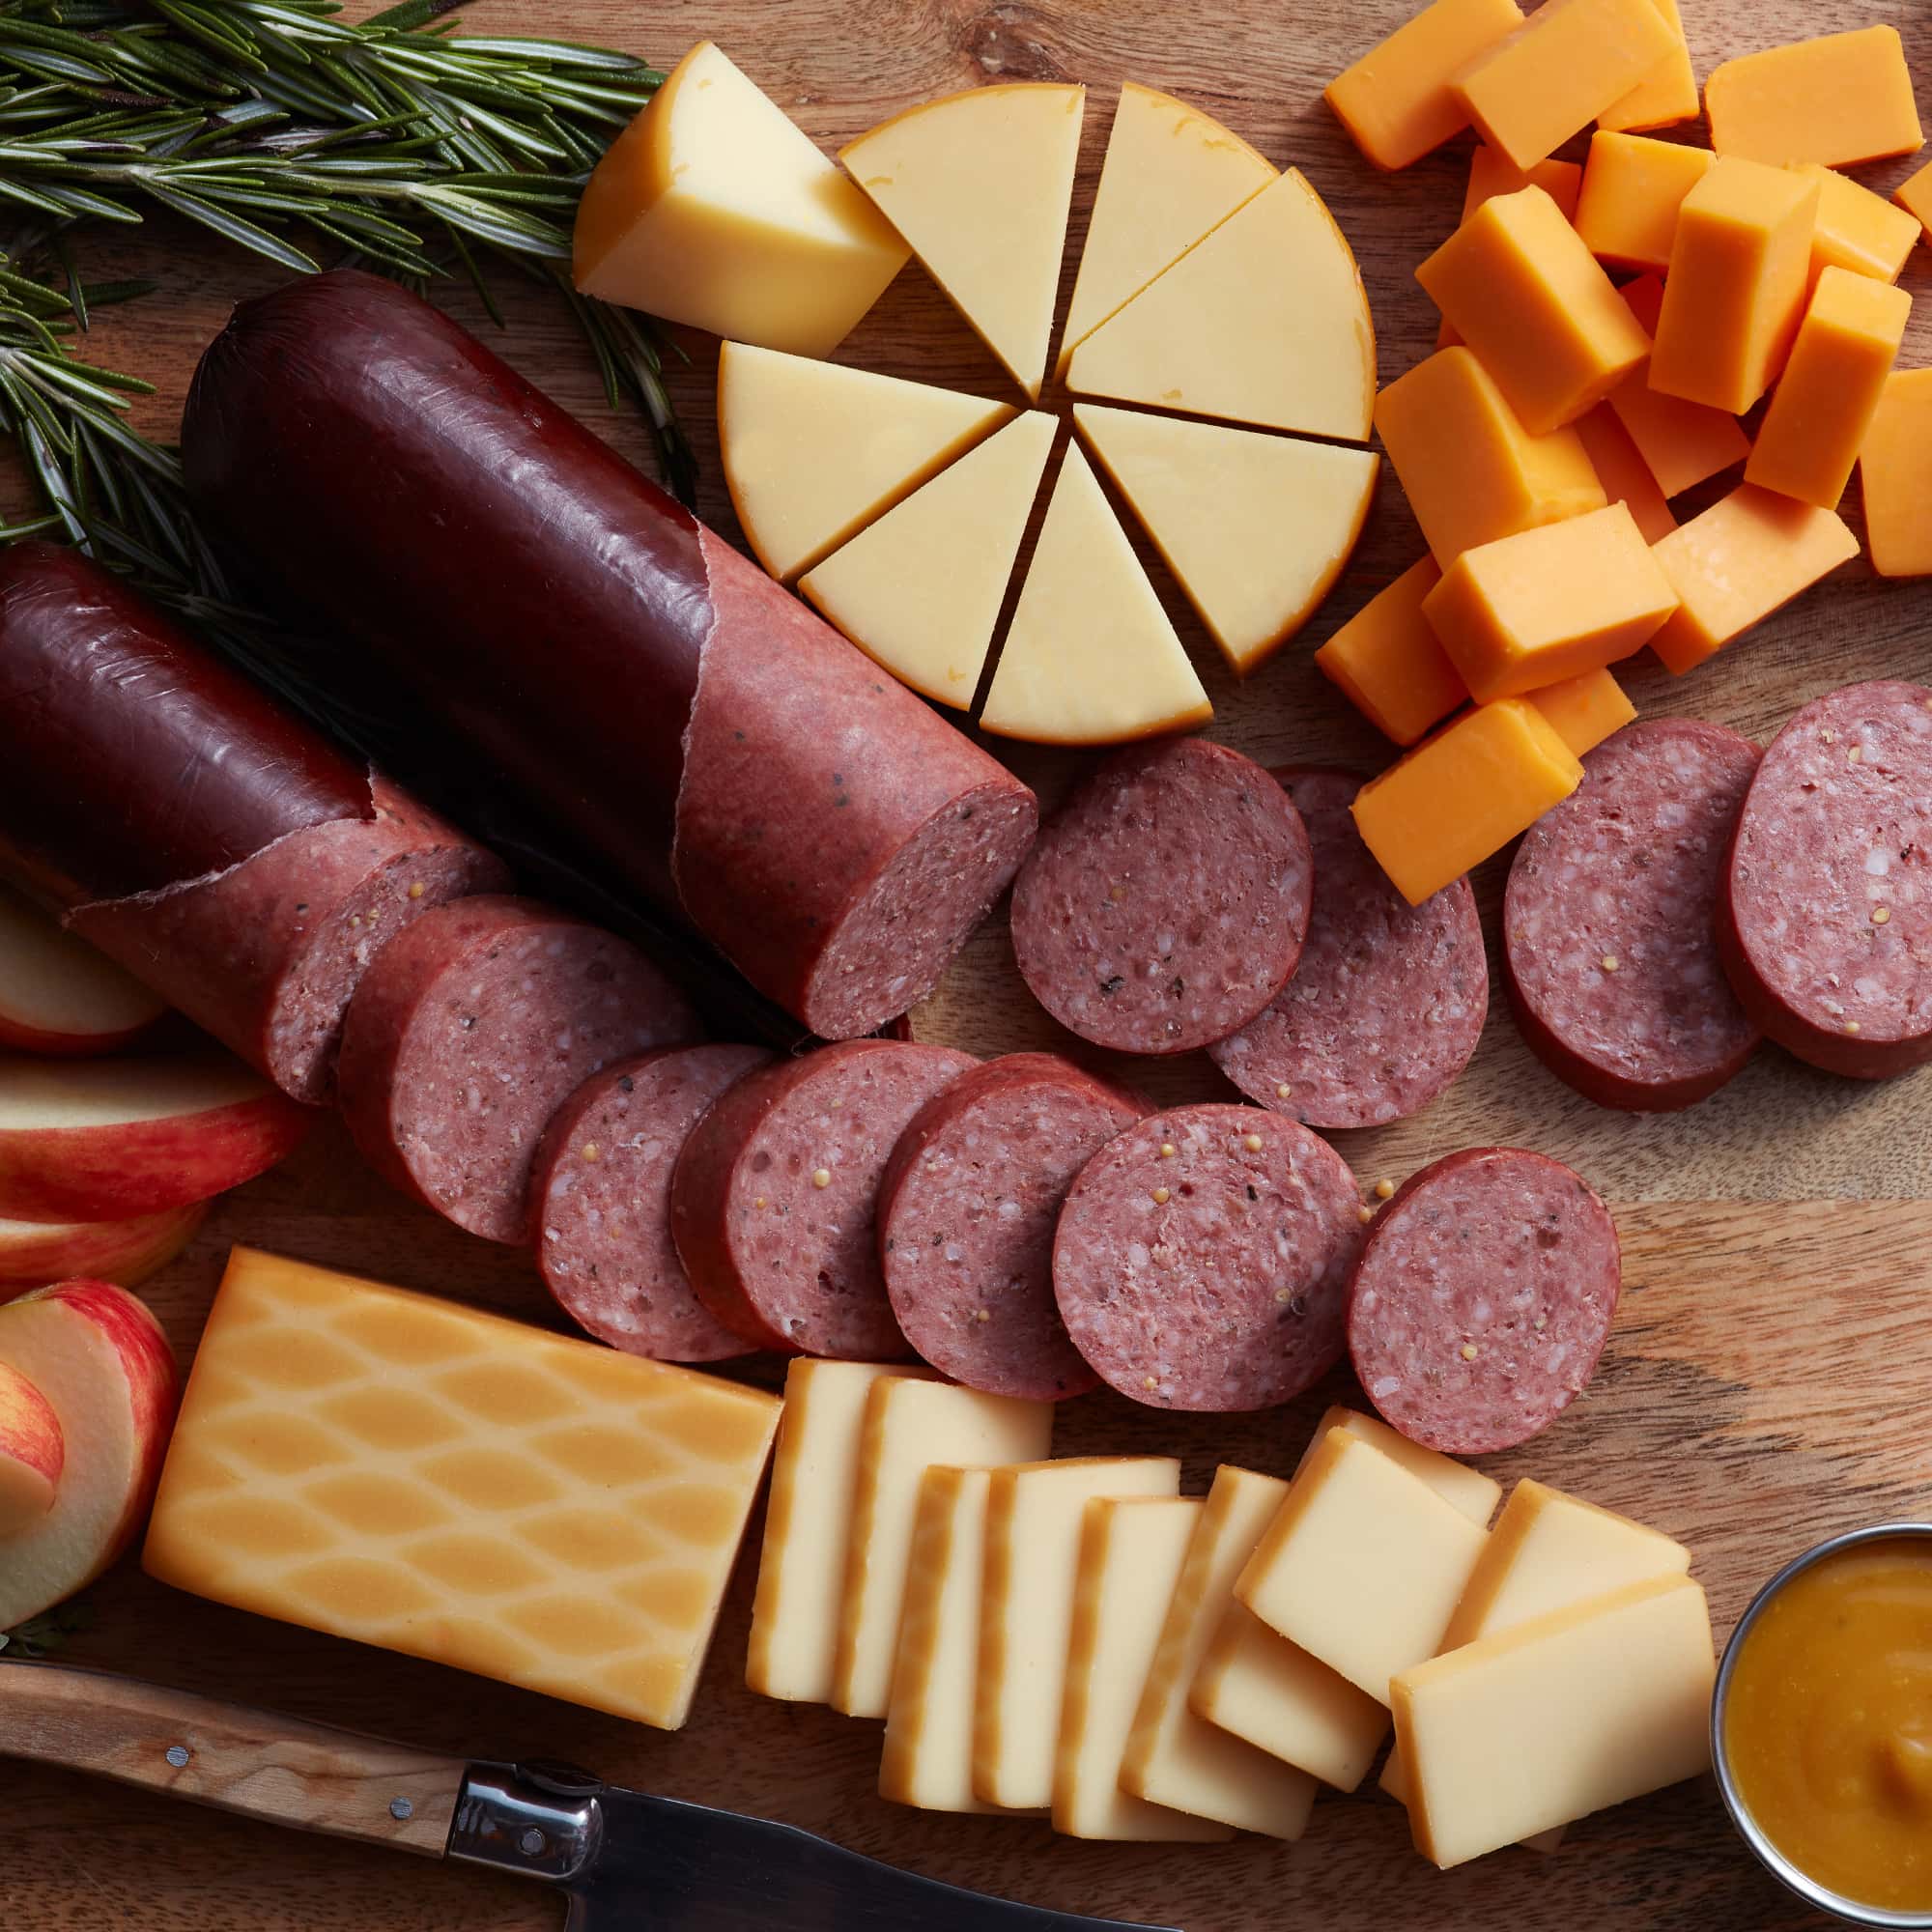 https://www.hickoryfarms.com/on/demandware.static/-/Sites-Web-Master-Catalog/default/dw12140771/images/products/halloween-summer-sausage-cheese-gift-box-004839-3.jpg